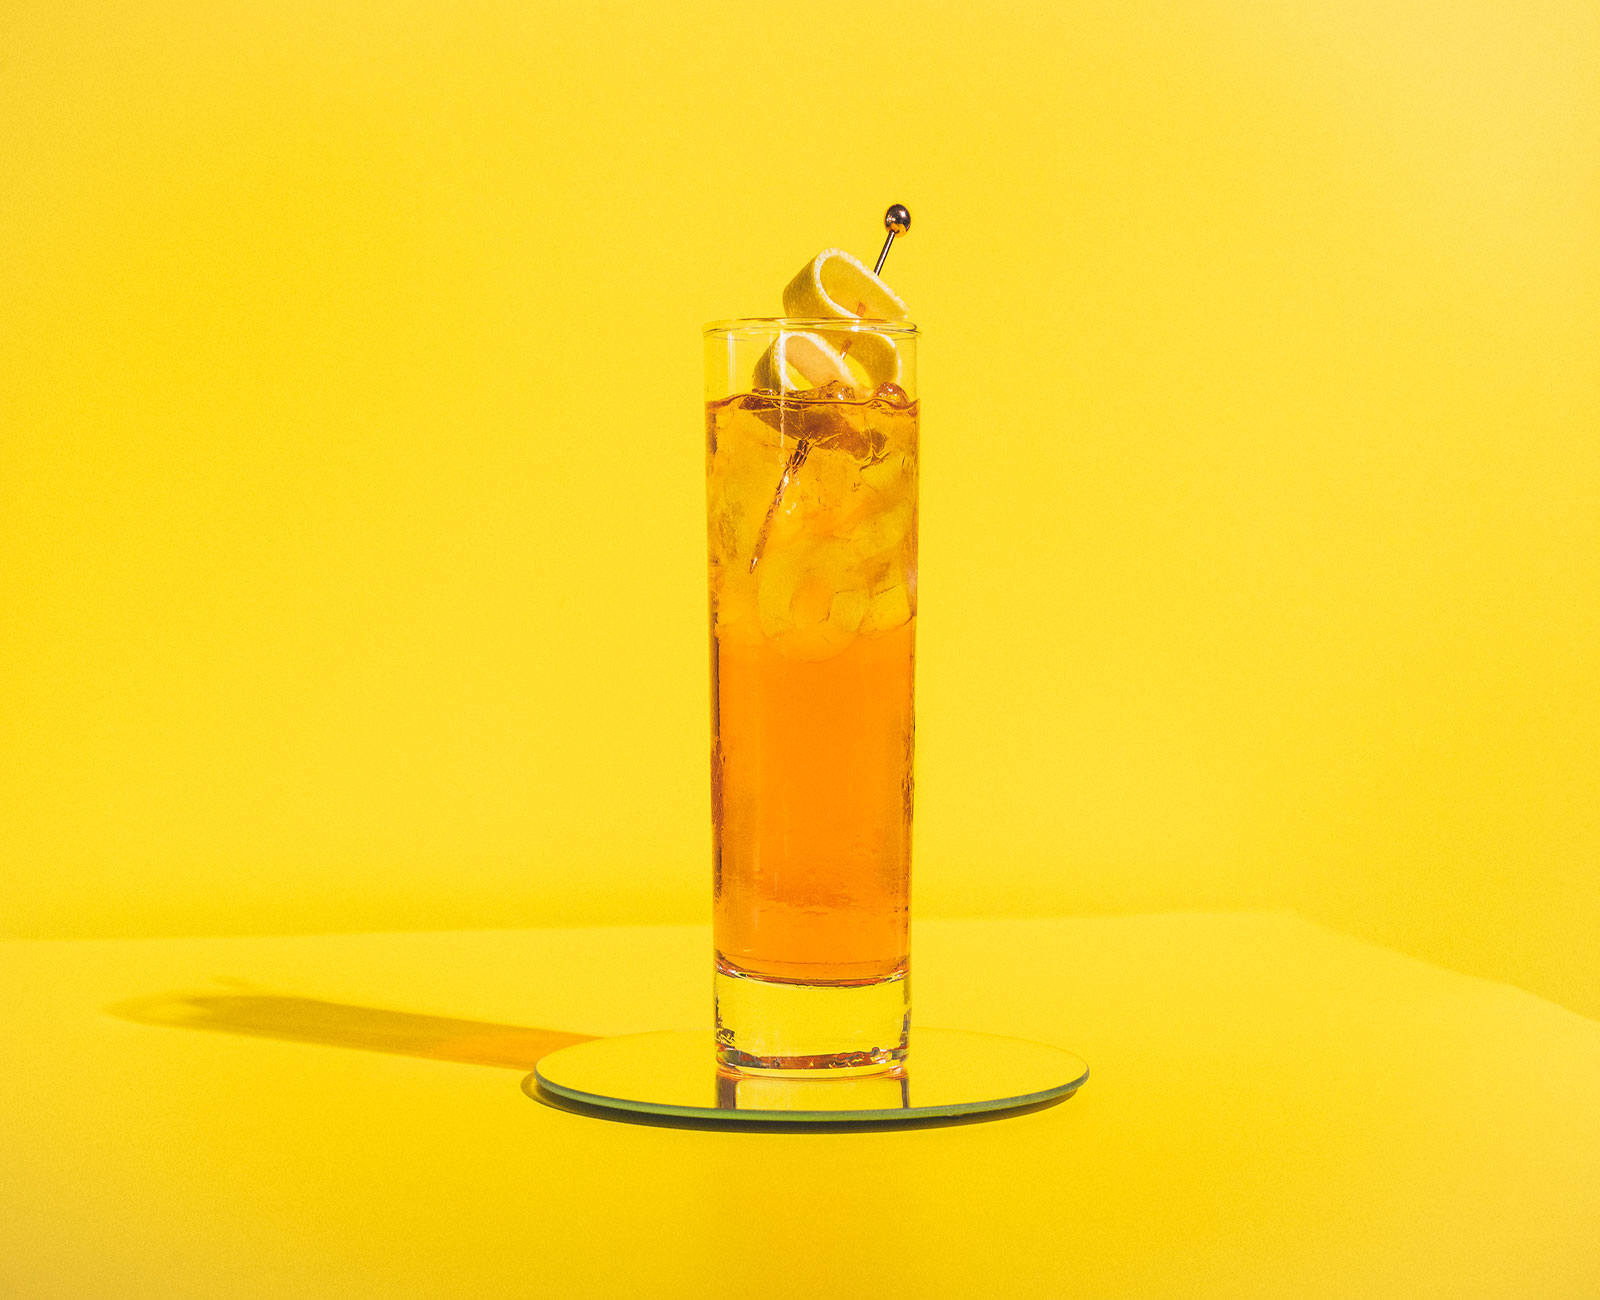 Madera County Spritz aperitif with a grapefruit peel garnish and yellow background